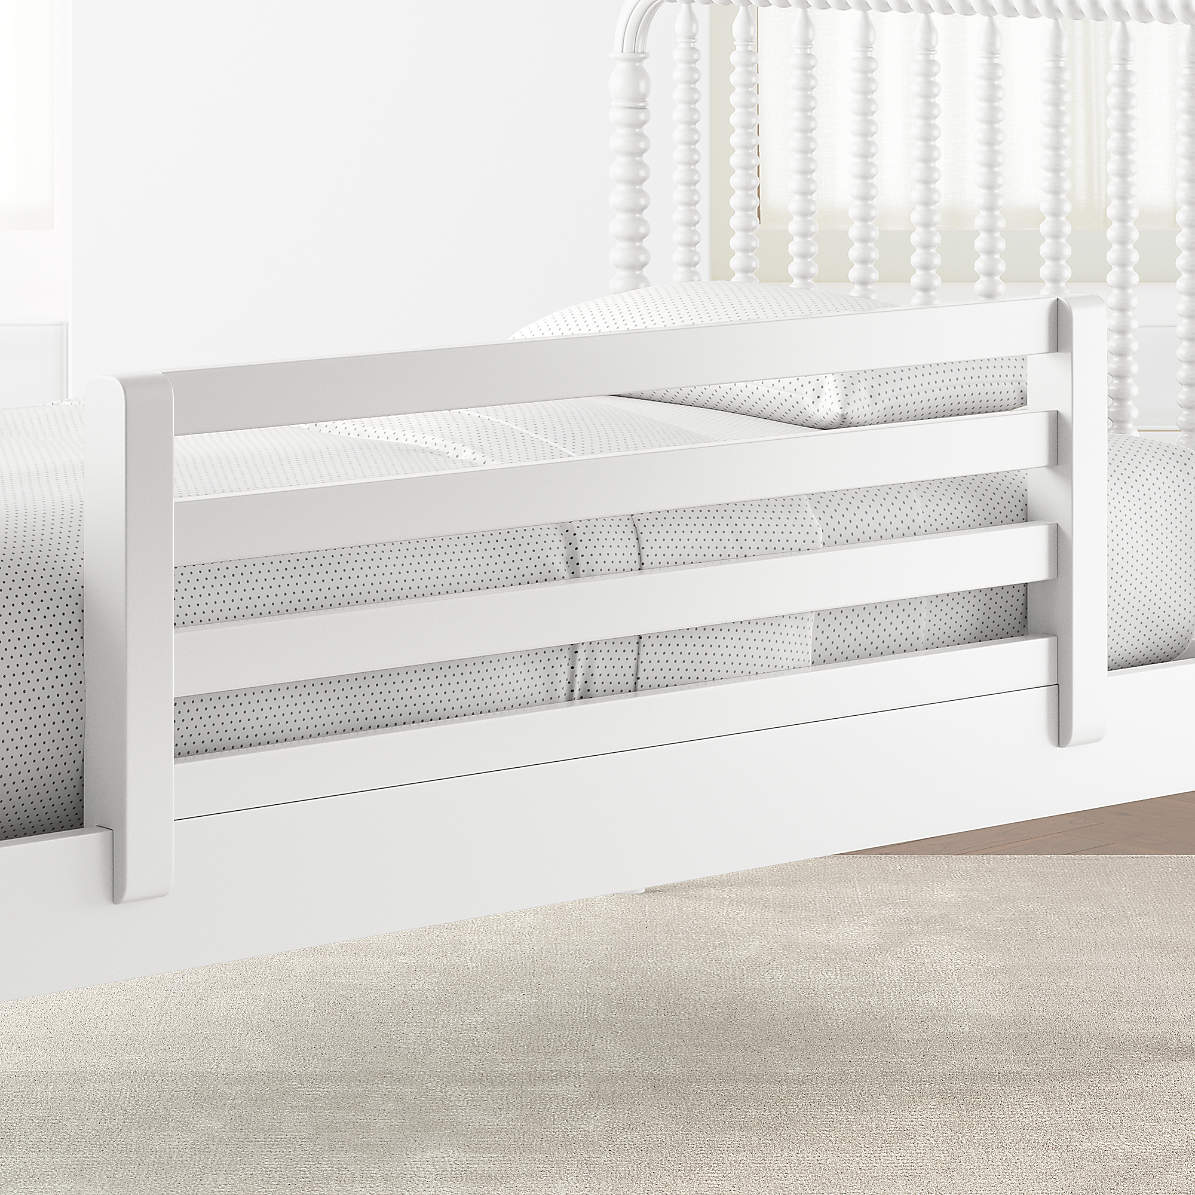 Kids White Bed Rail Reviews Crate, Twin Bed Frame Rails Hook On Top